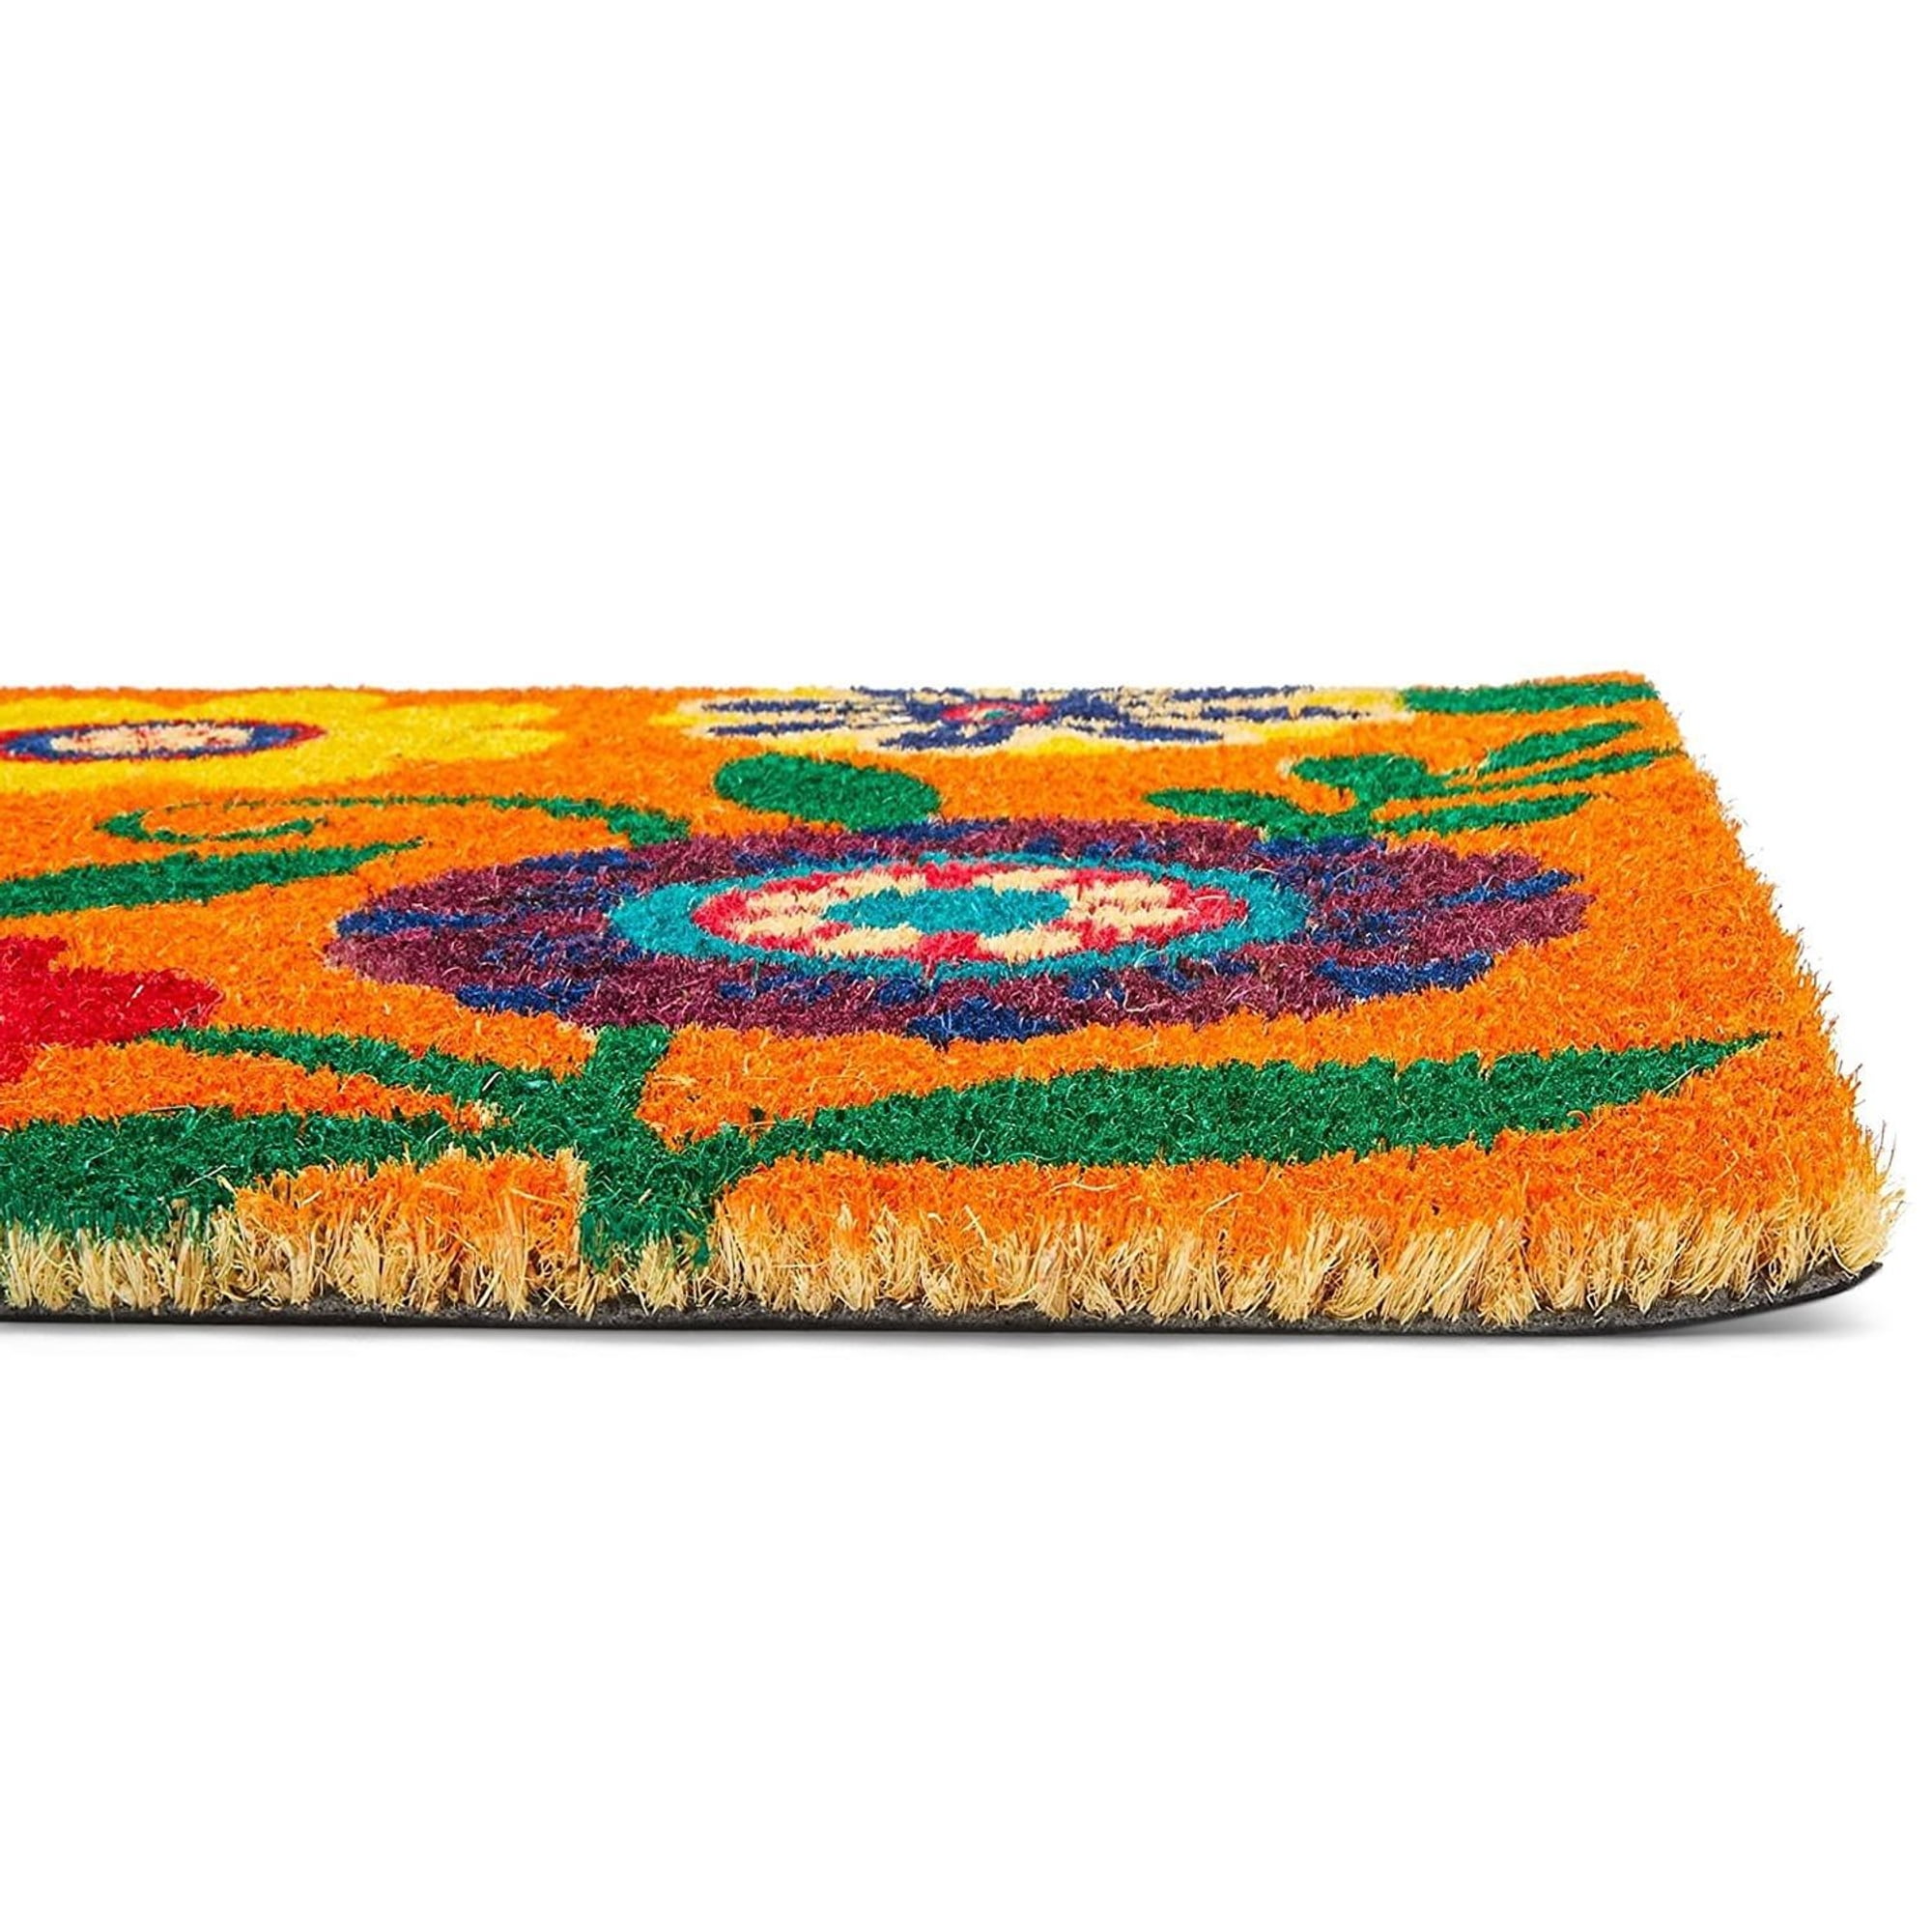  Cute Peacock Coir Door Mat with Heavy Duty Backing Outdoor Mats  for Back Door Waterproof Natural Doormat Pretty Farm Animal Green Peacock  Vintage Flowers Welcome Mats Outside Decor 16x24in : Patio